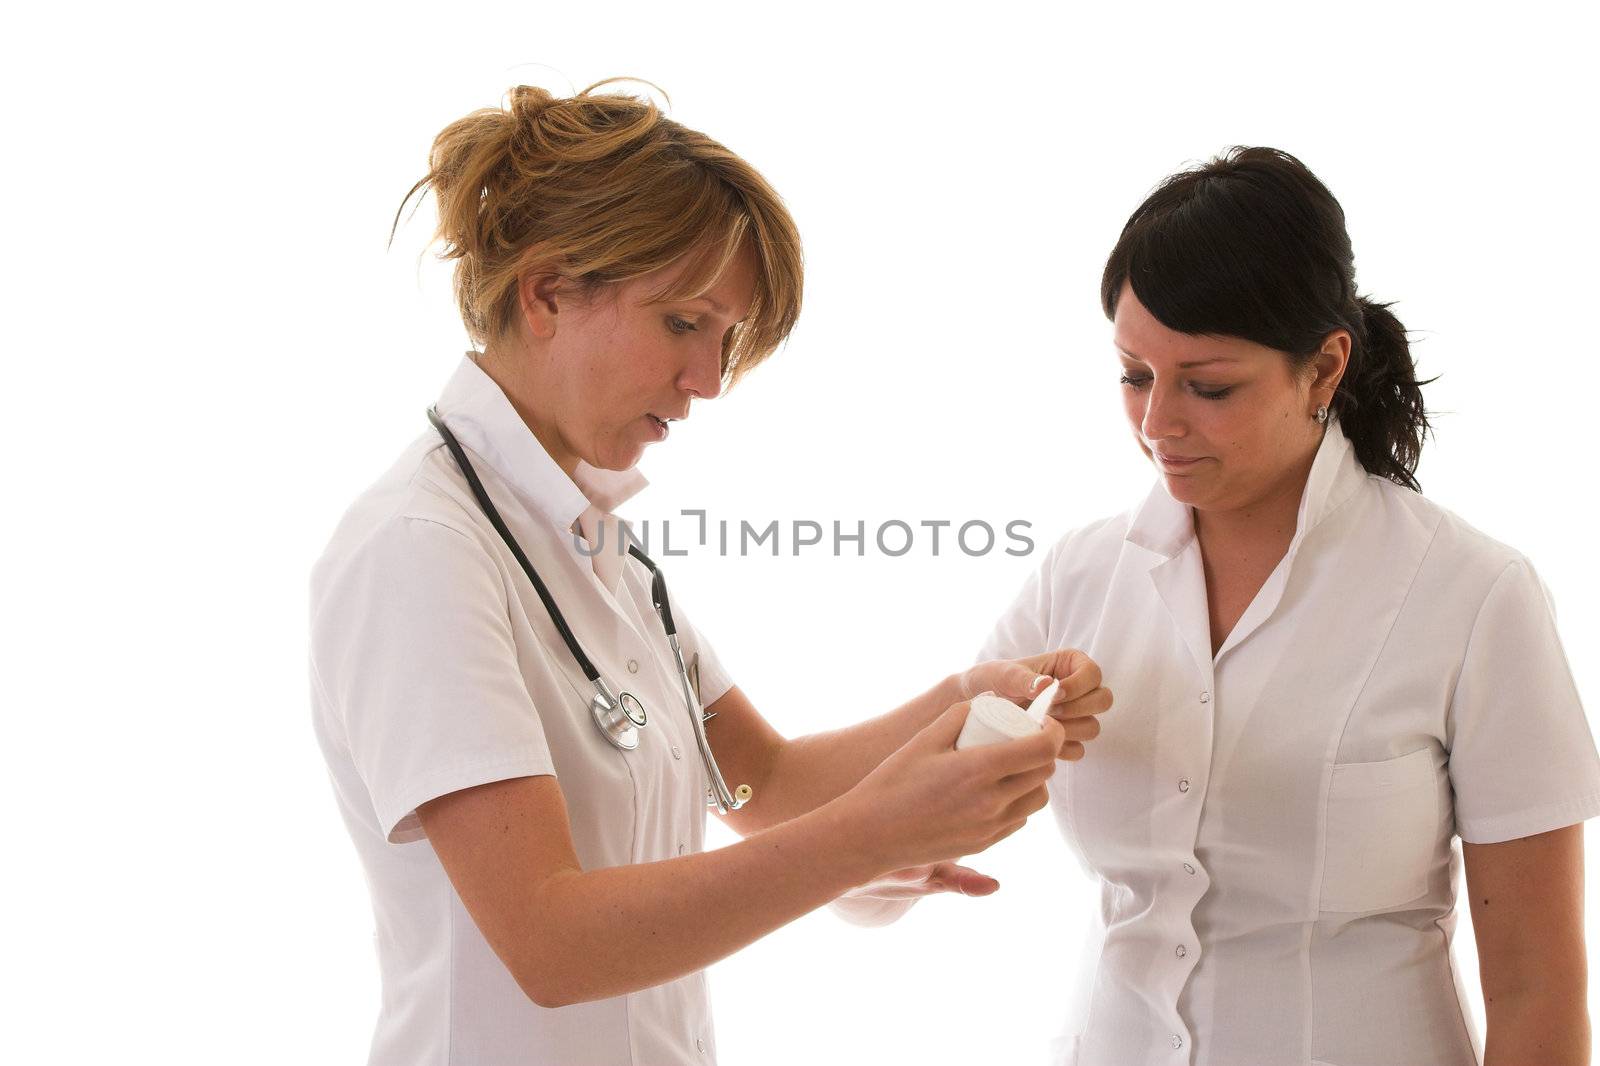 Two nurses standing next to eachother while one is going to learn the other how to put on a tape around a hand